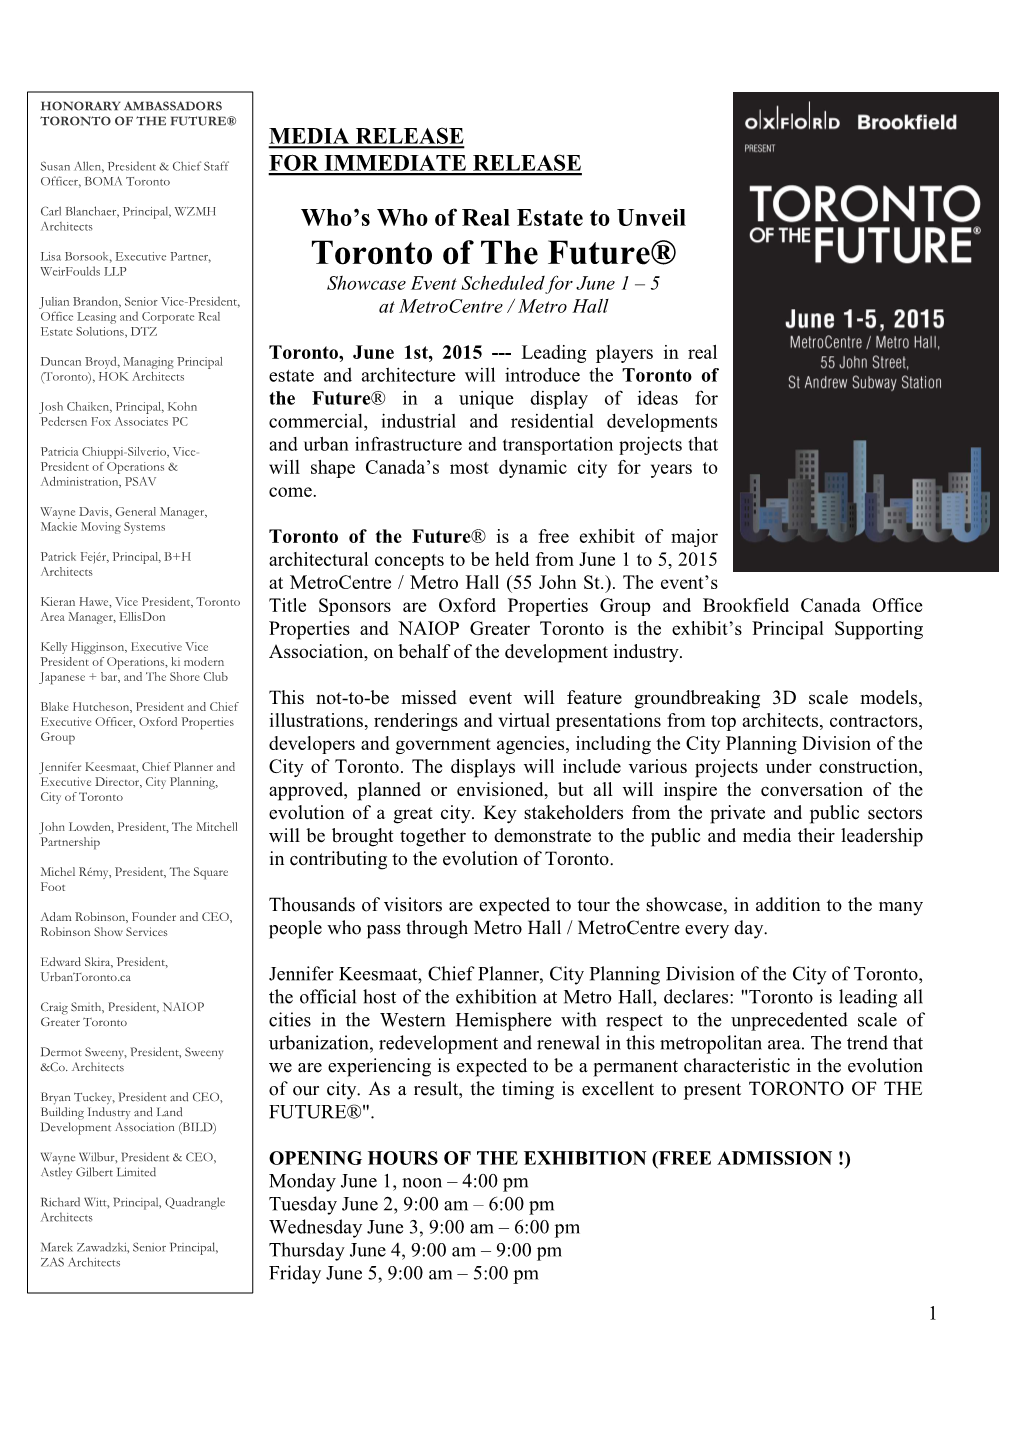 TORONTO of the FUTURE PRESS RELEASE As of June